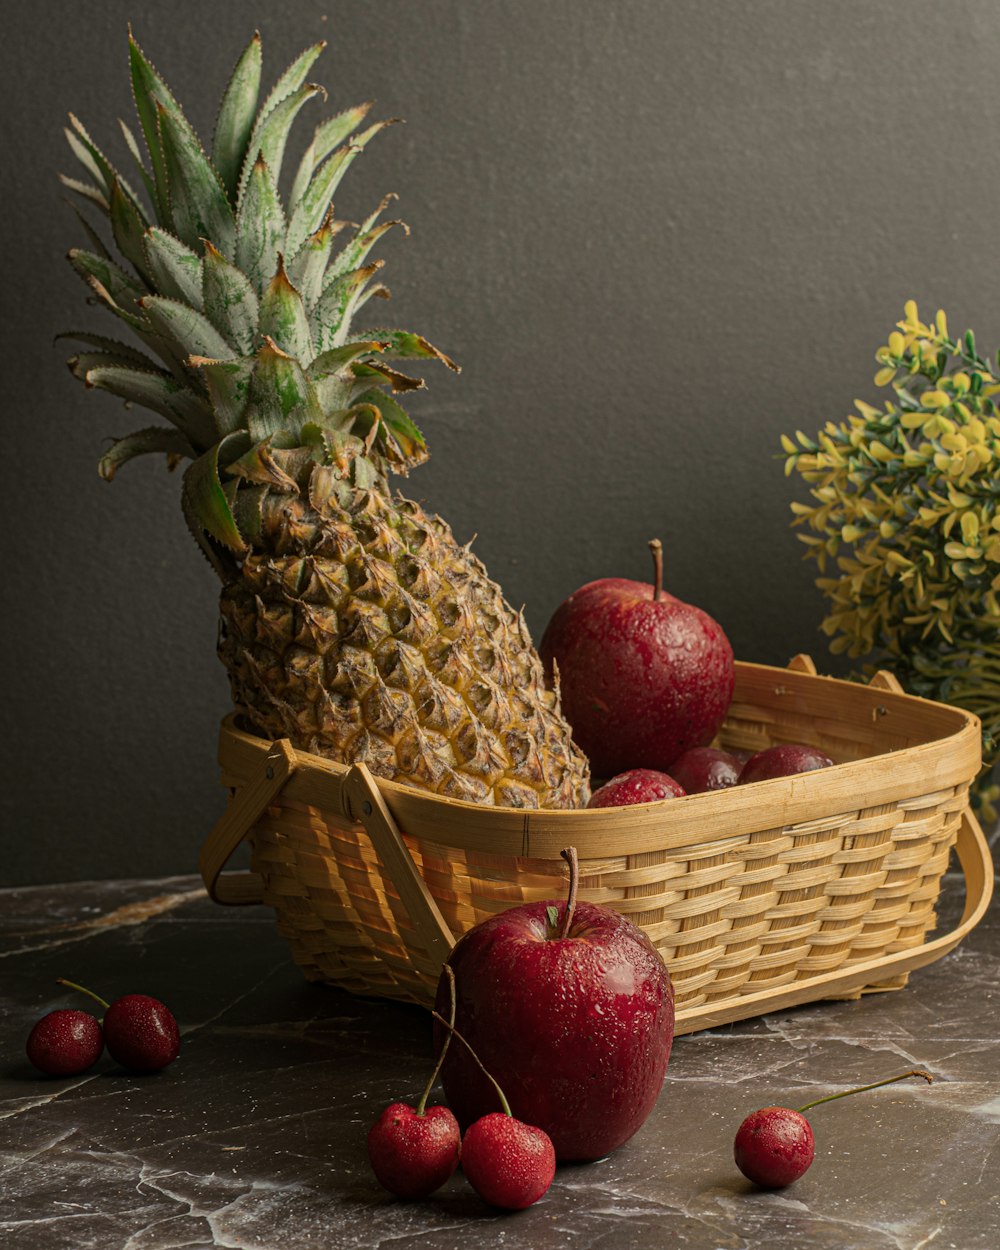 red apple fruit on brown woven basket